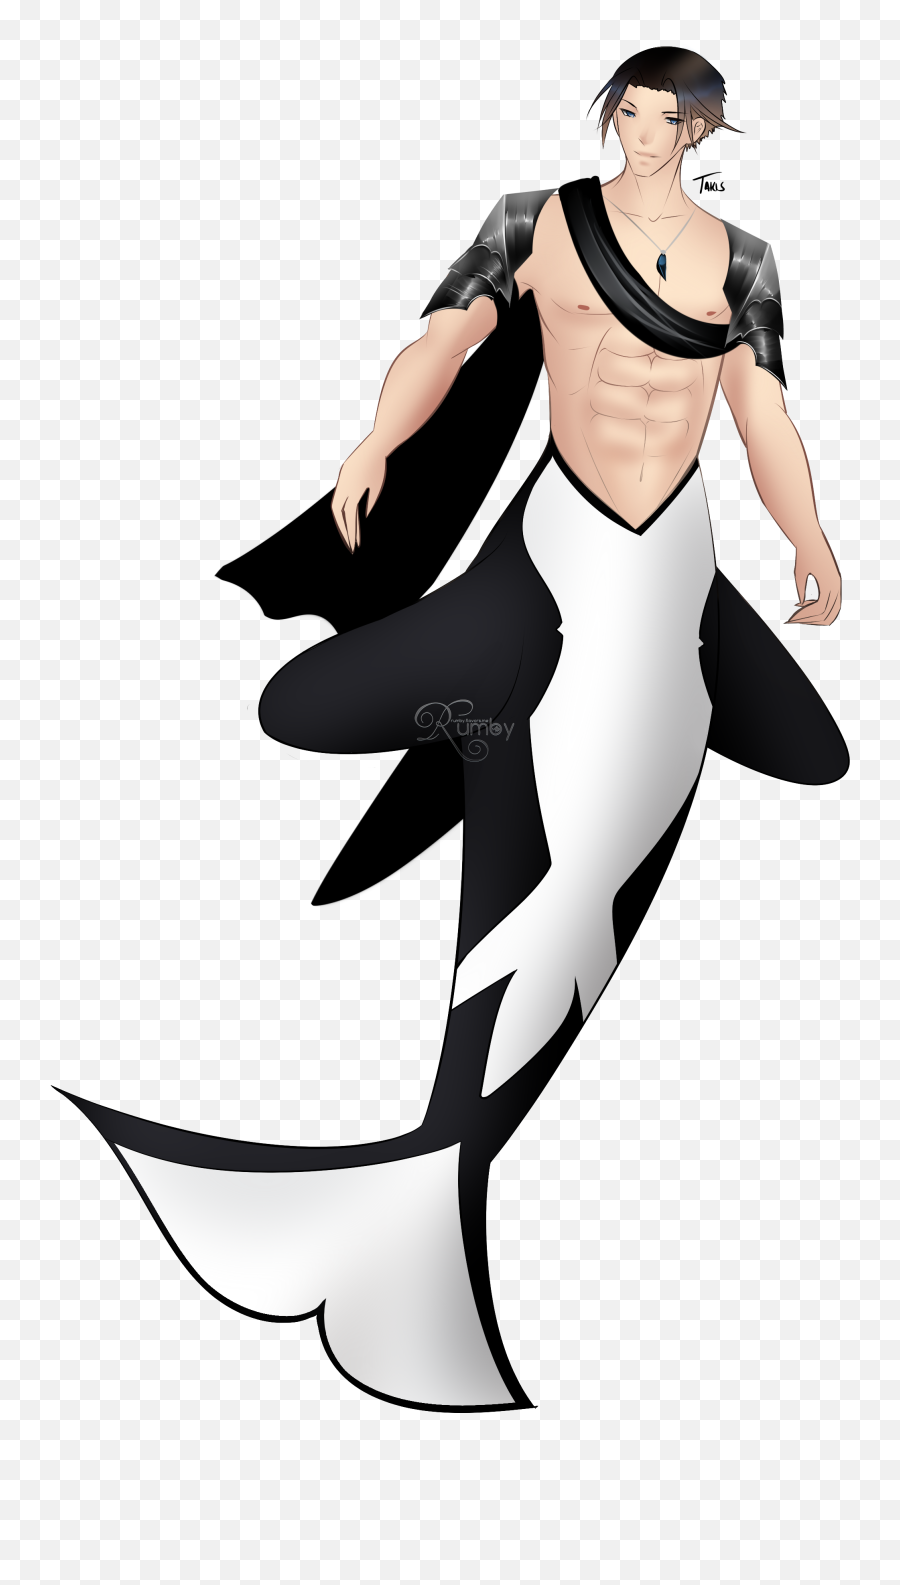 In The World Of Dream Crystal Takis An Orca Merman - Orca Merman Emoji,Orca Emoji